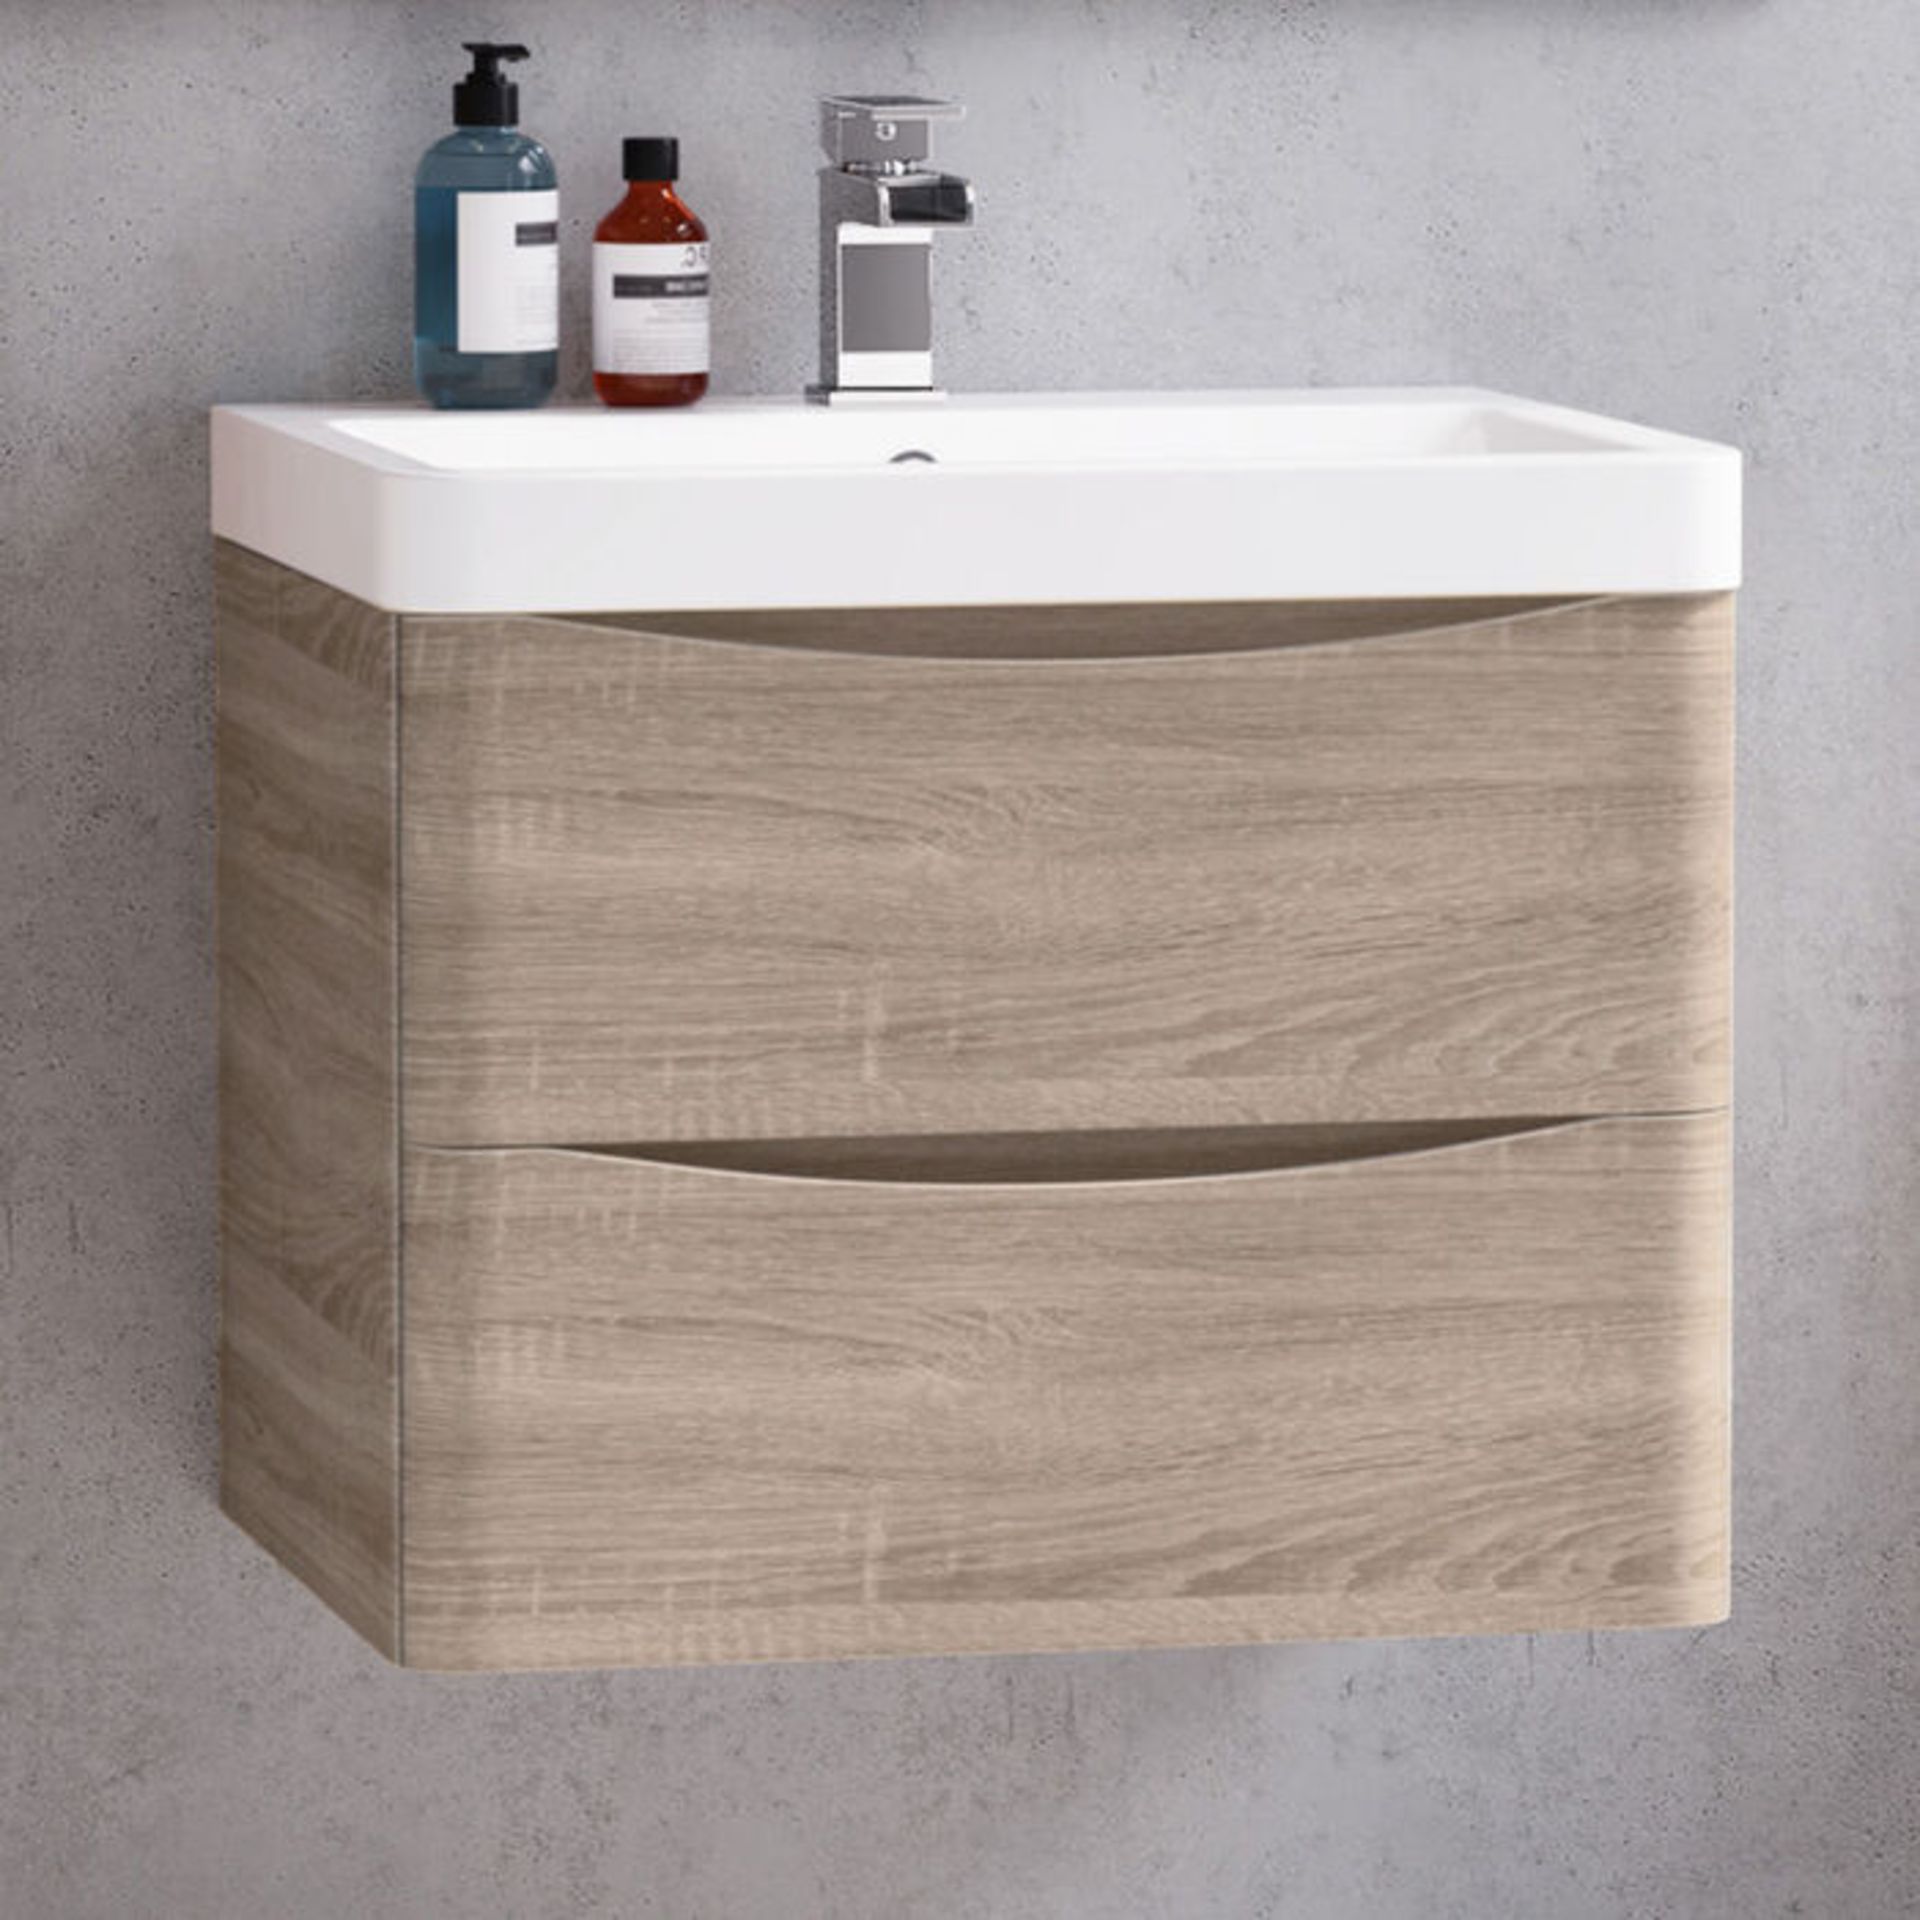 (Z28) 600mm Oak Effect Wall Hung Bathroom Vanity With Sink. RRP £499.99. Comes complete with b...